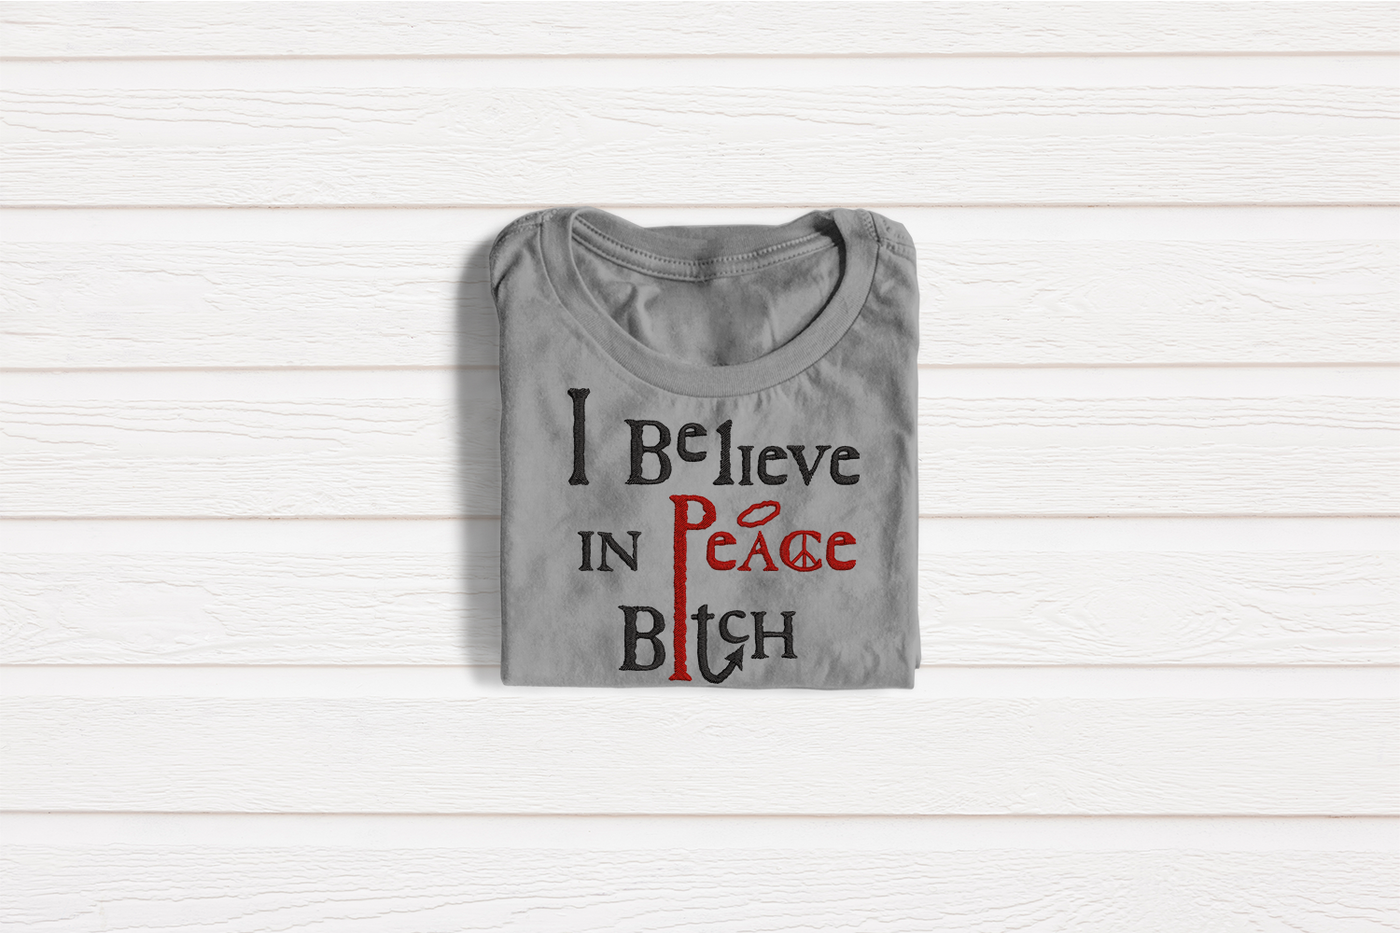 Folded shirt with the embroidered phrase "I believe in Peace Bitch."